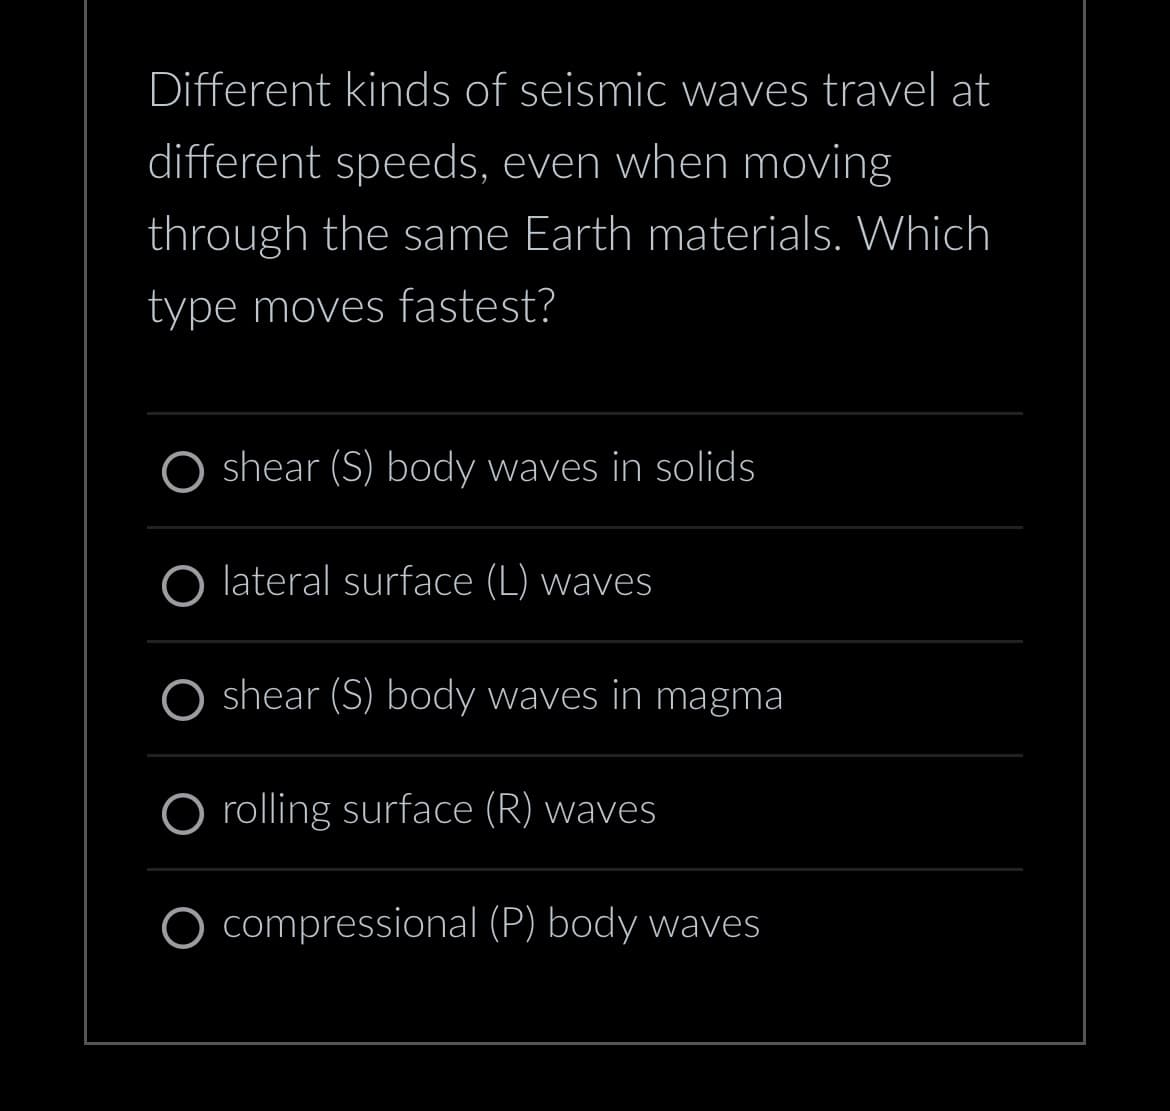 Different kinds of seismic waves travel at
different speeds, even when moving
through the same Earth materials. Which
type moves fastest?
shear (S) body waves in solids
O lateral surface (L) waves
shear (S) body waves in magma
O rolling surface (R) waves
O compressional (P) body waves